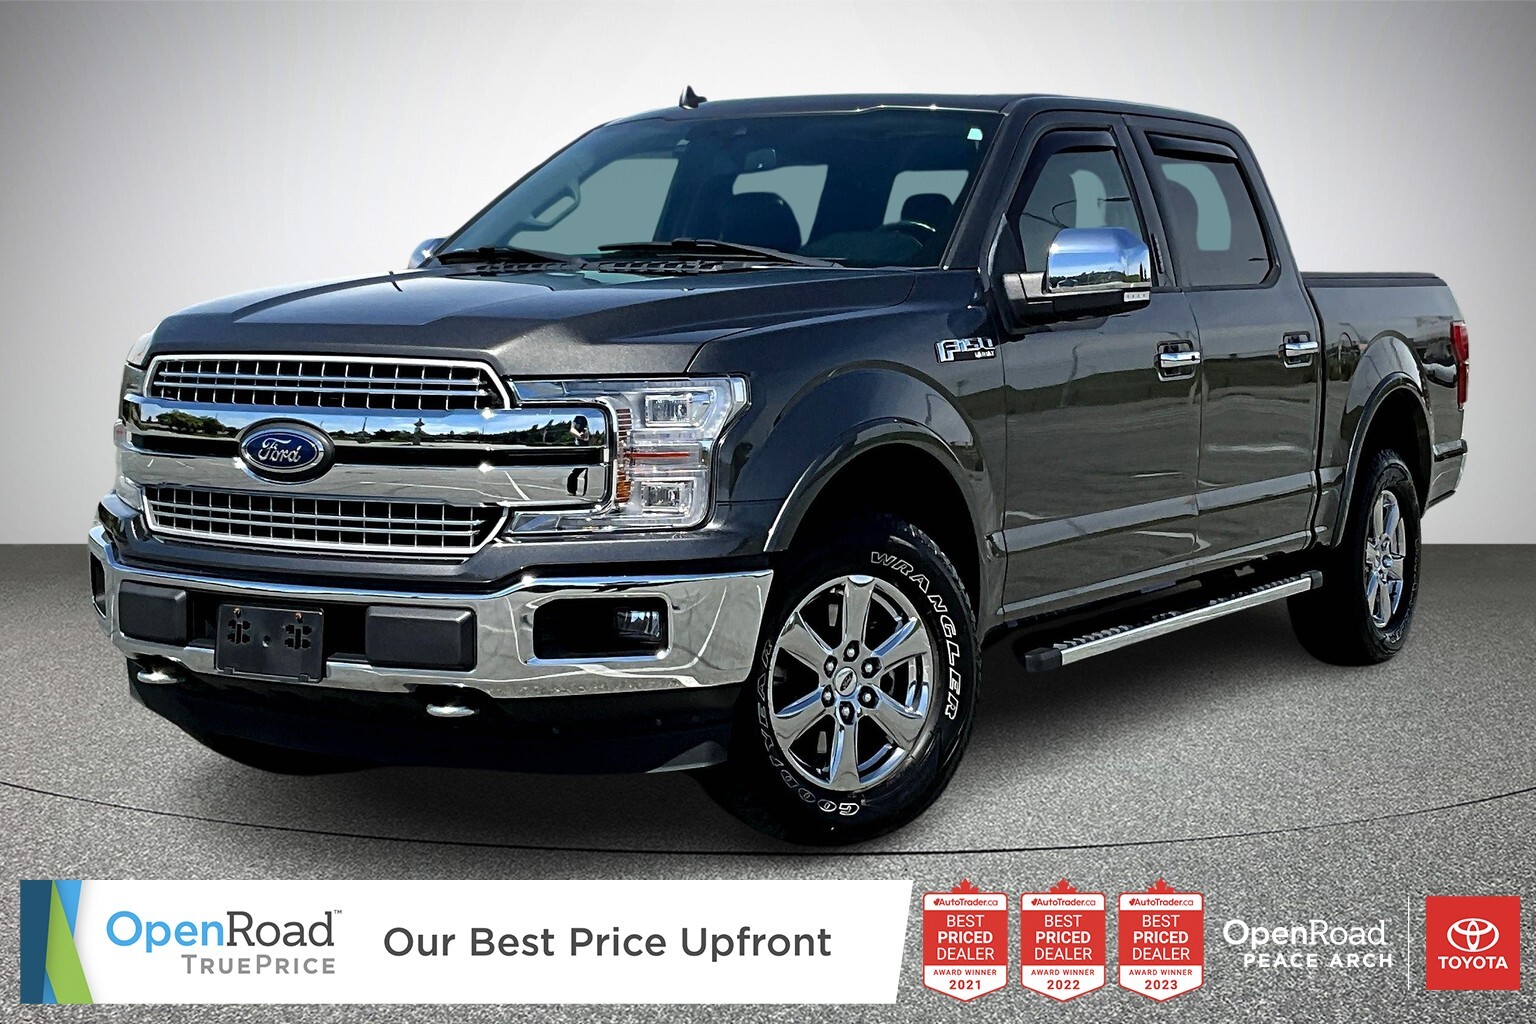 2018 Ford F-150 4x4 - Supercrew Lariat - 145 WB LUXURY PACKAGE